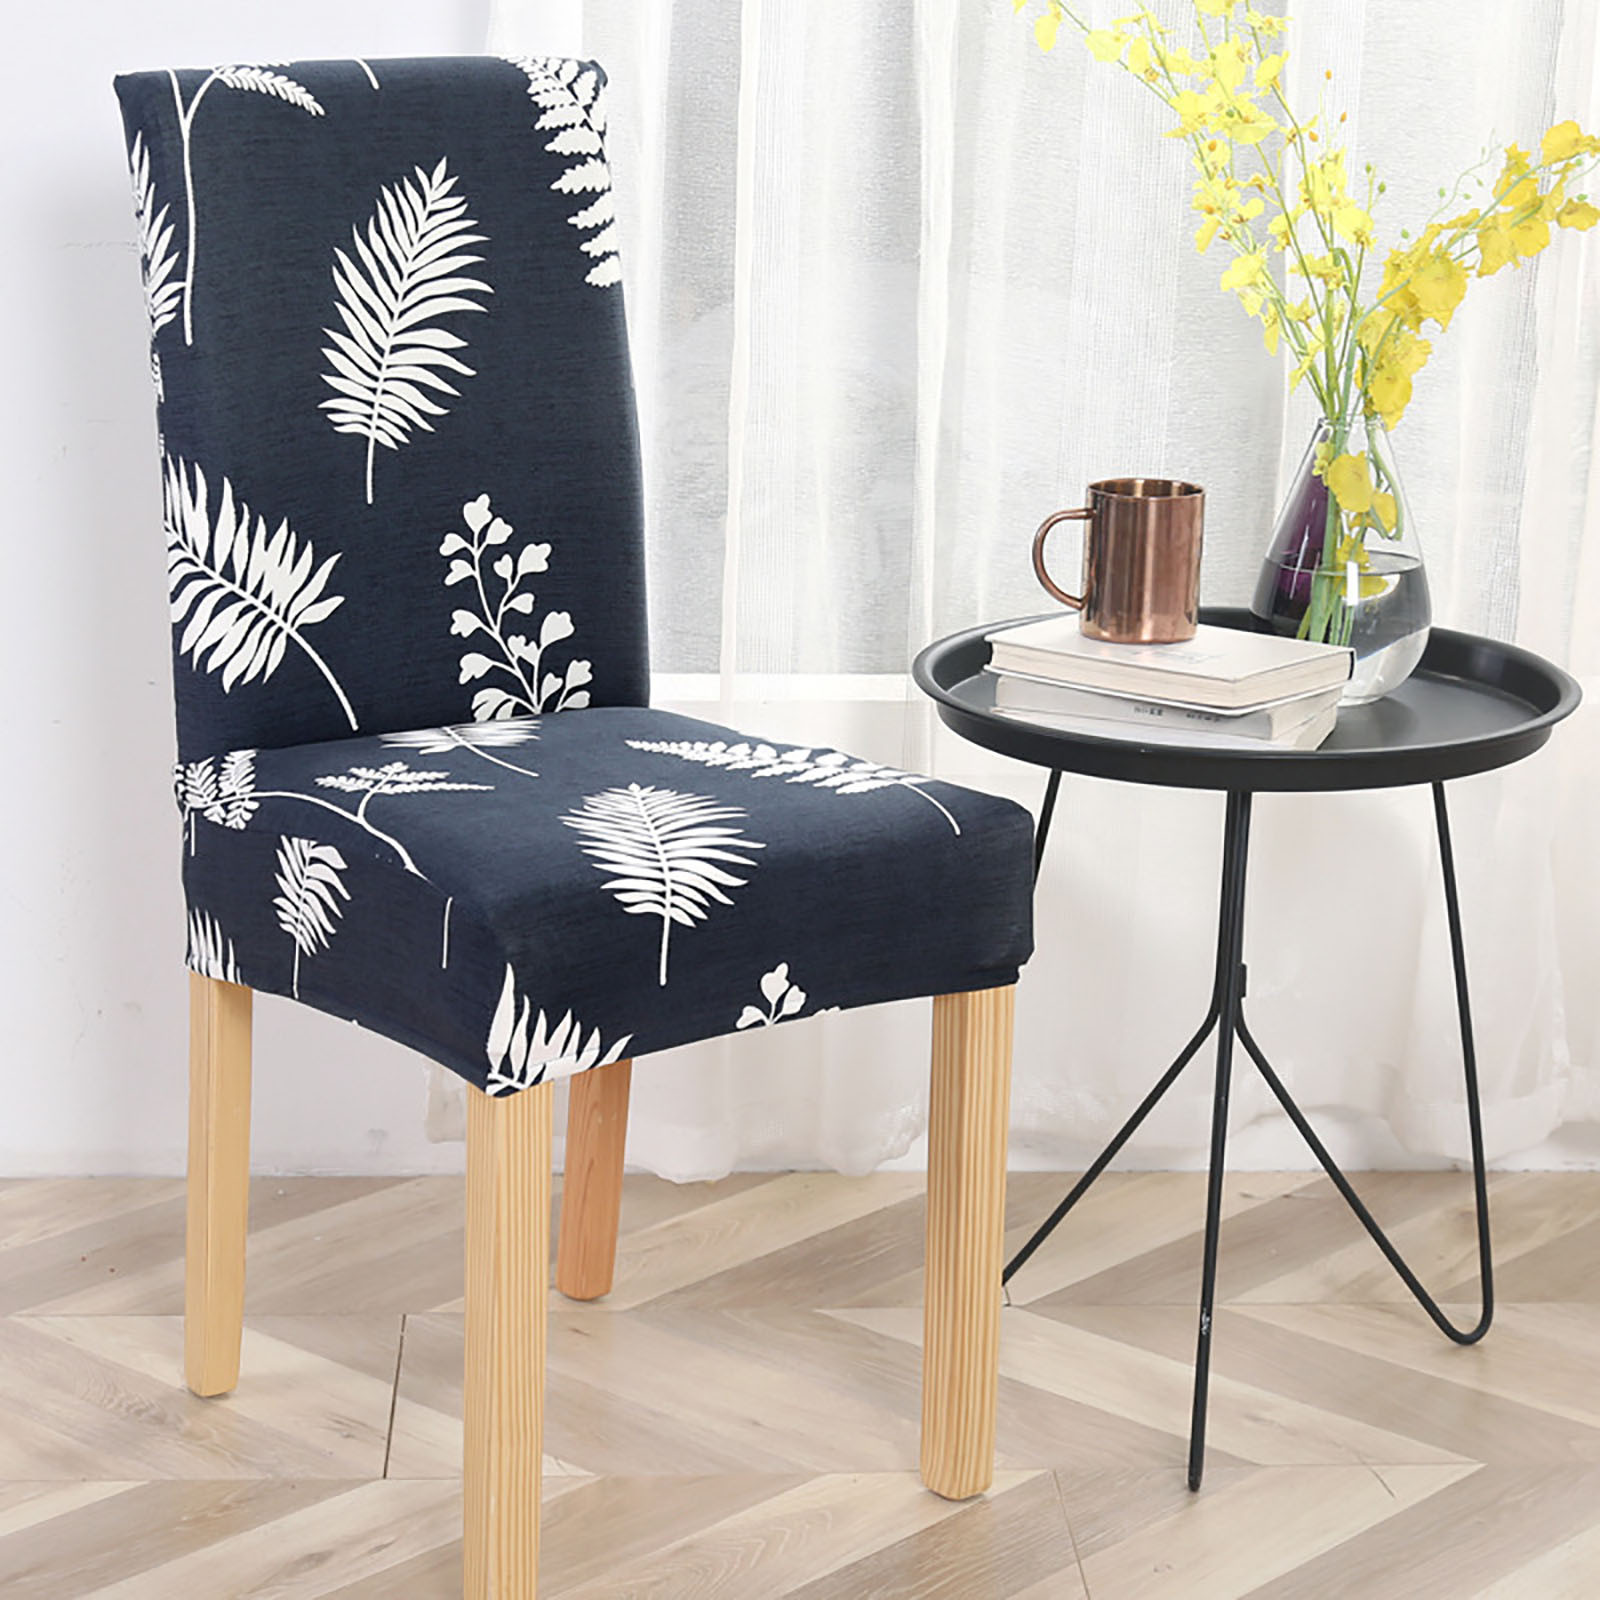 wendunide home textiles Chair Cover Stretch Chair Package Chair Cover One-piece Stretch Chair Cover E - image 2 of 2